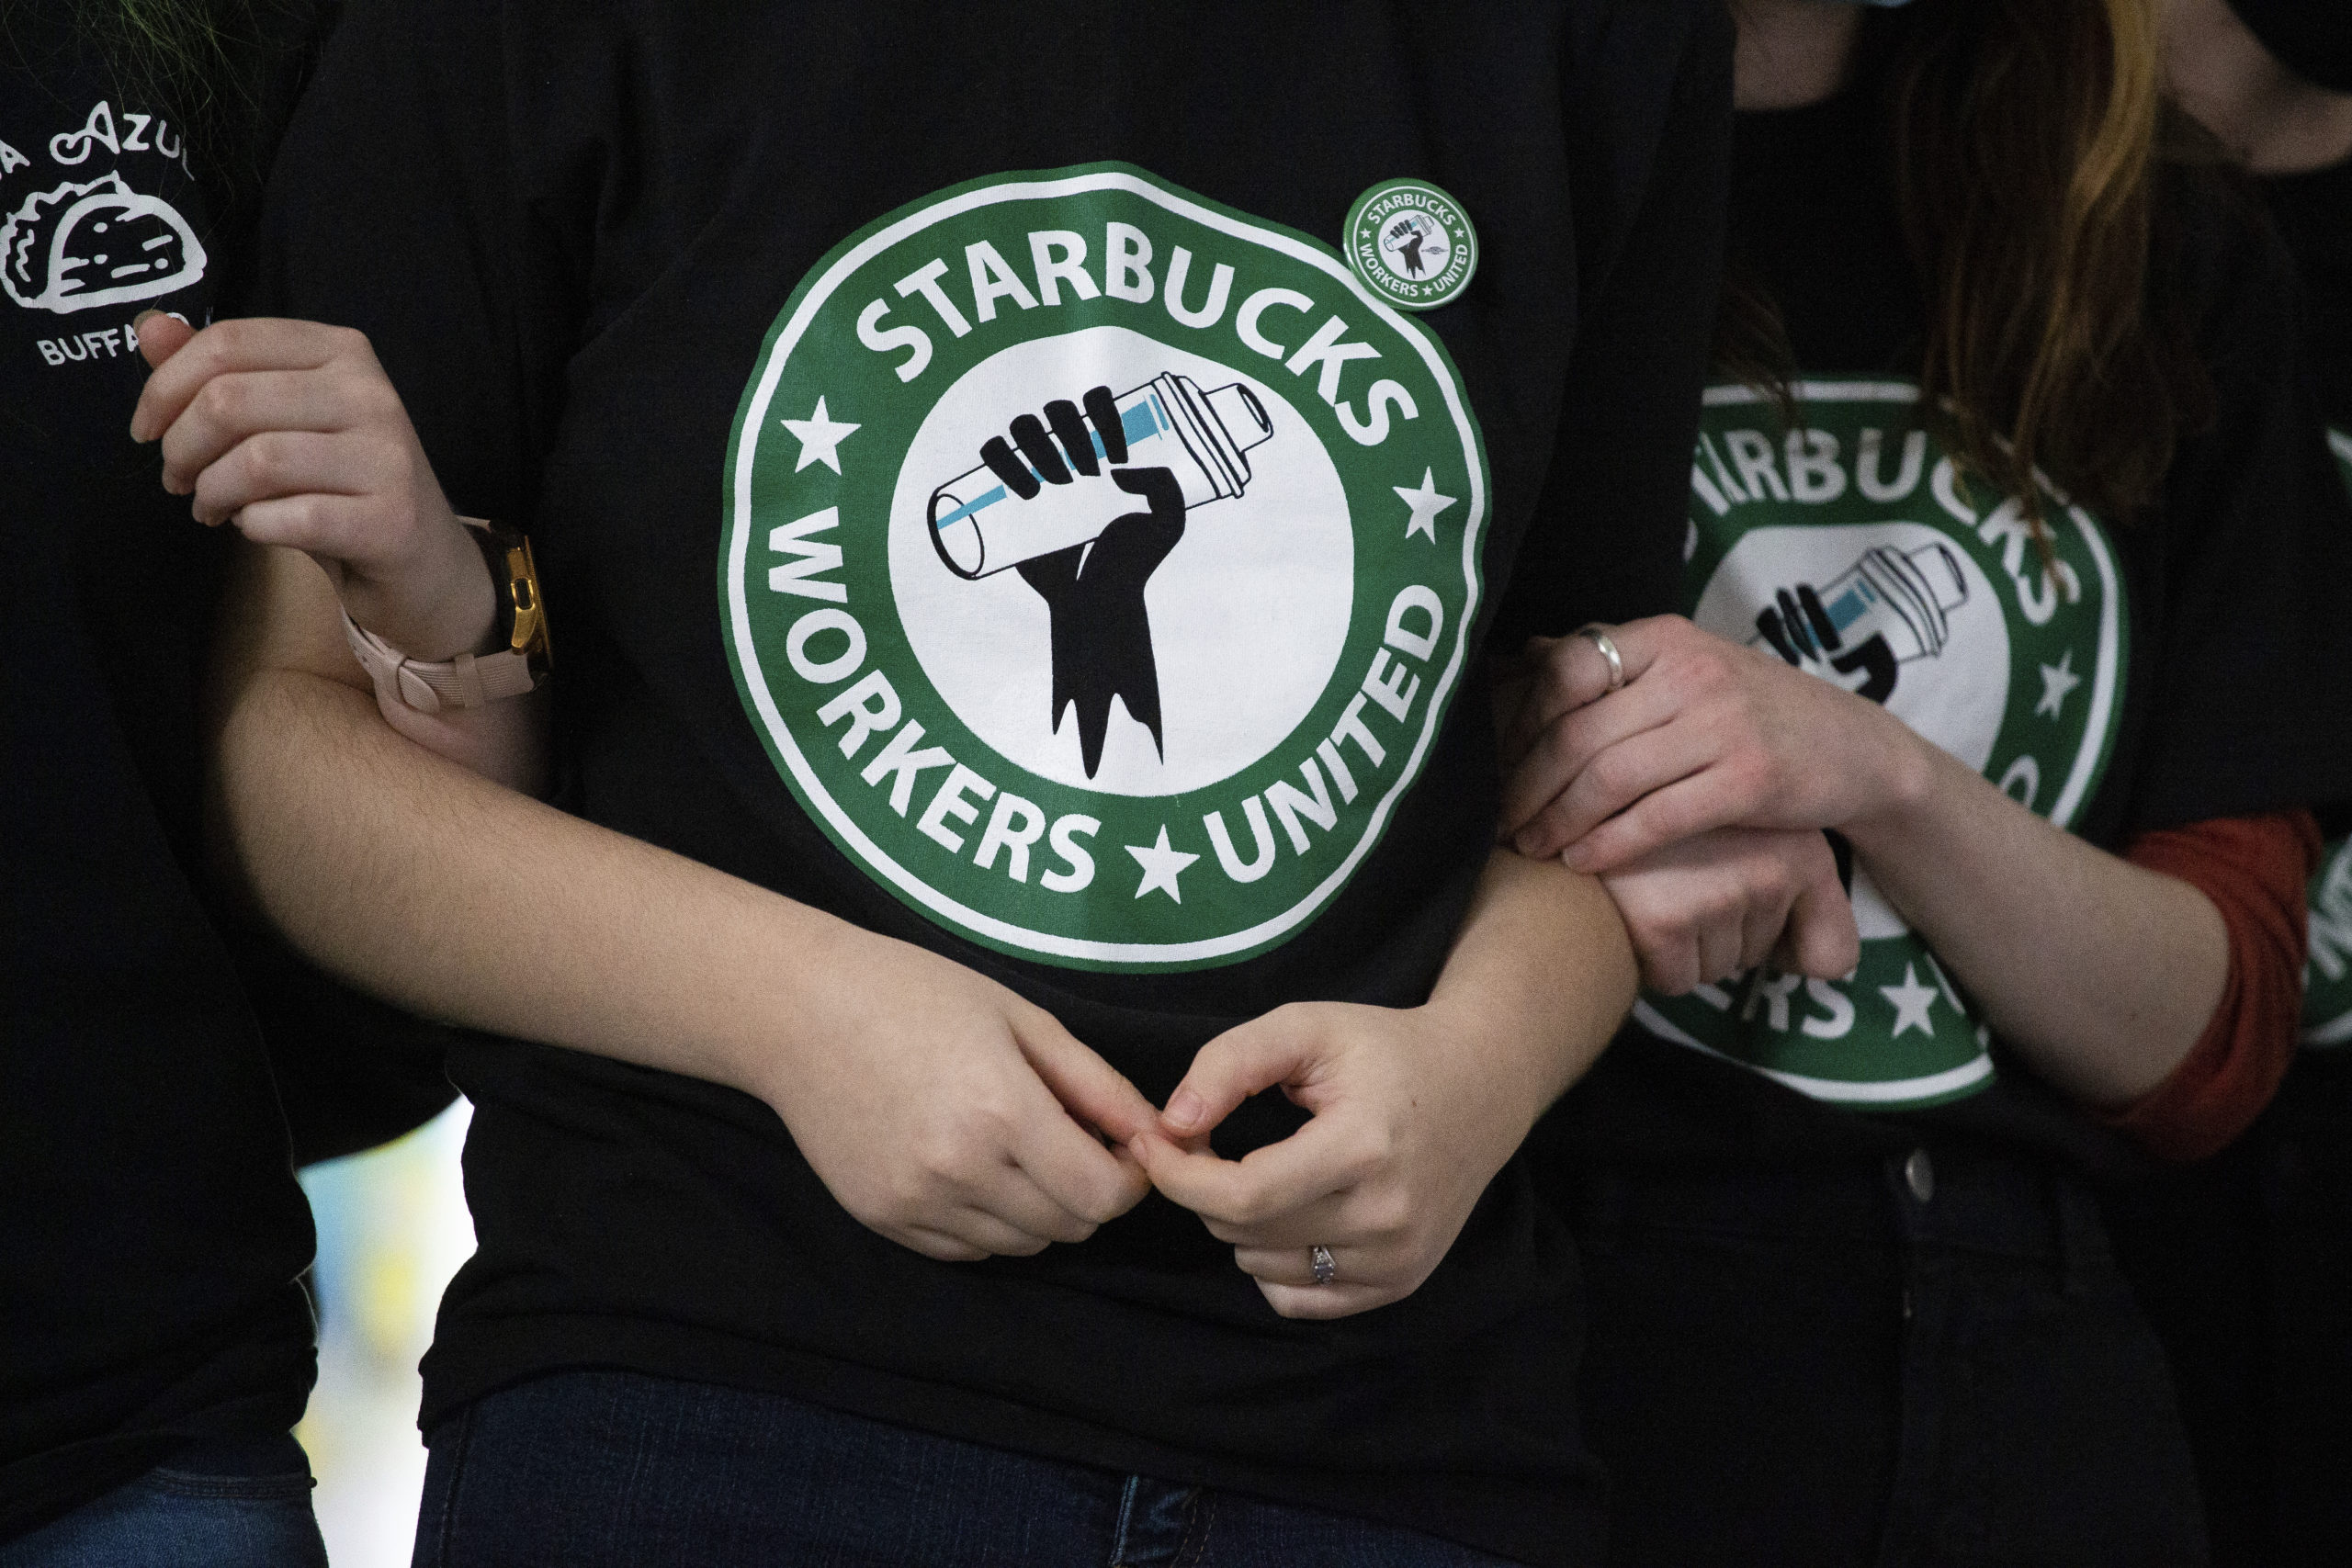 Workers vote to become first unionized Starbucks in Alabama